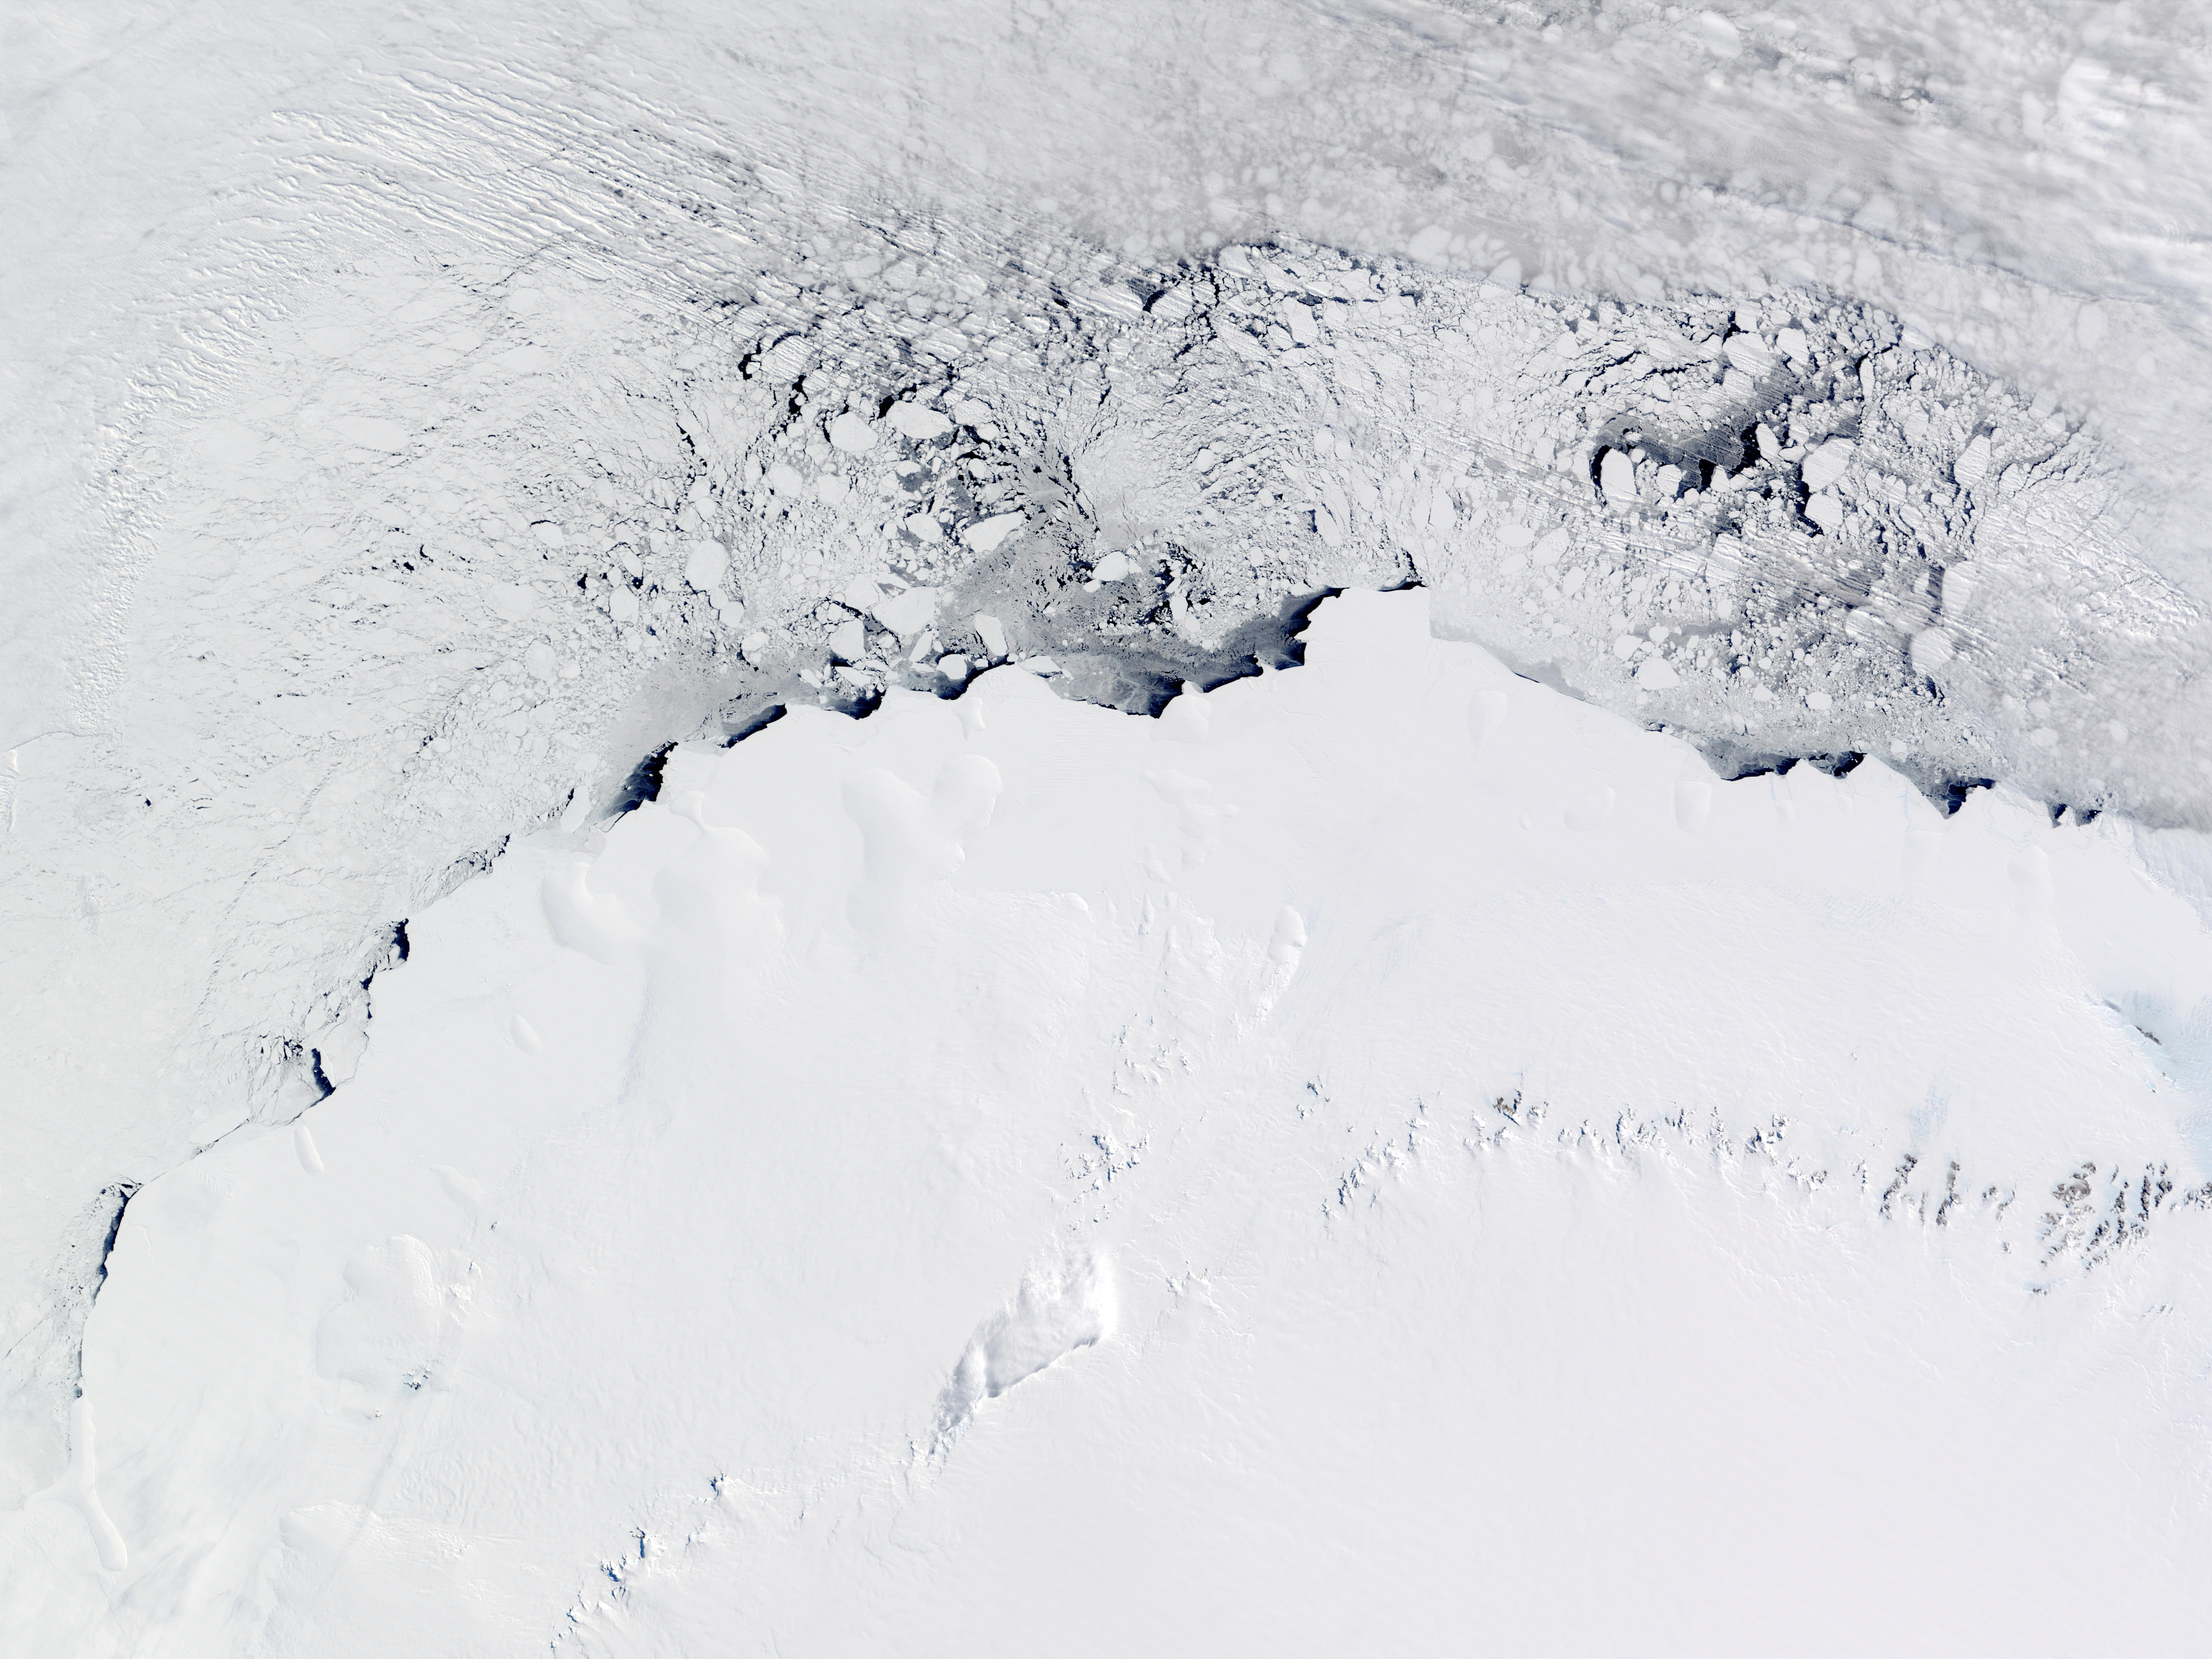 Riiser-Larsen Ice Shelf and Fimbul Ice Shelf, Antarctica - related image preview